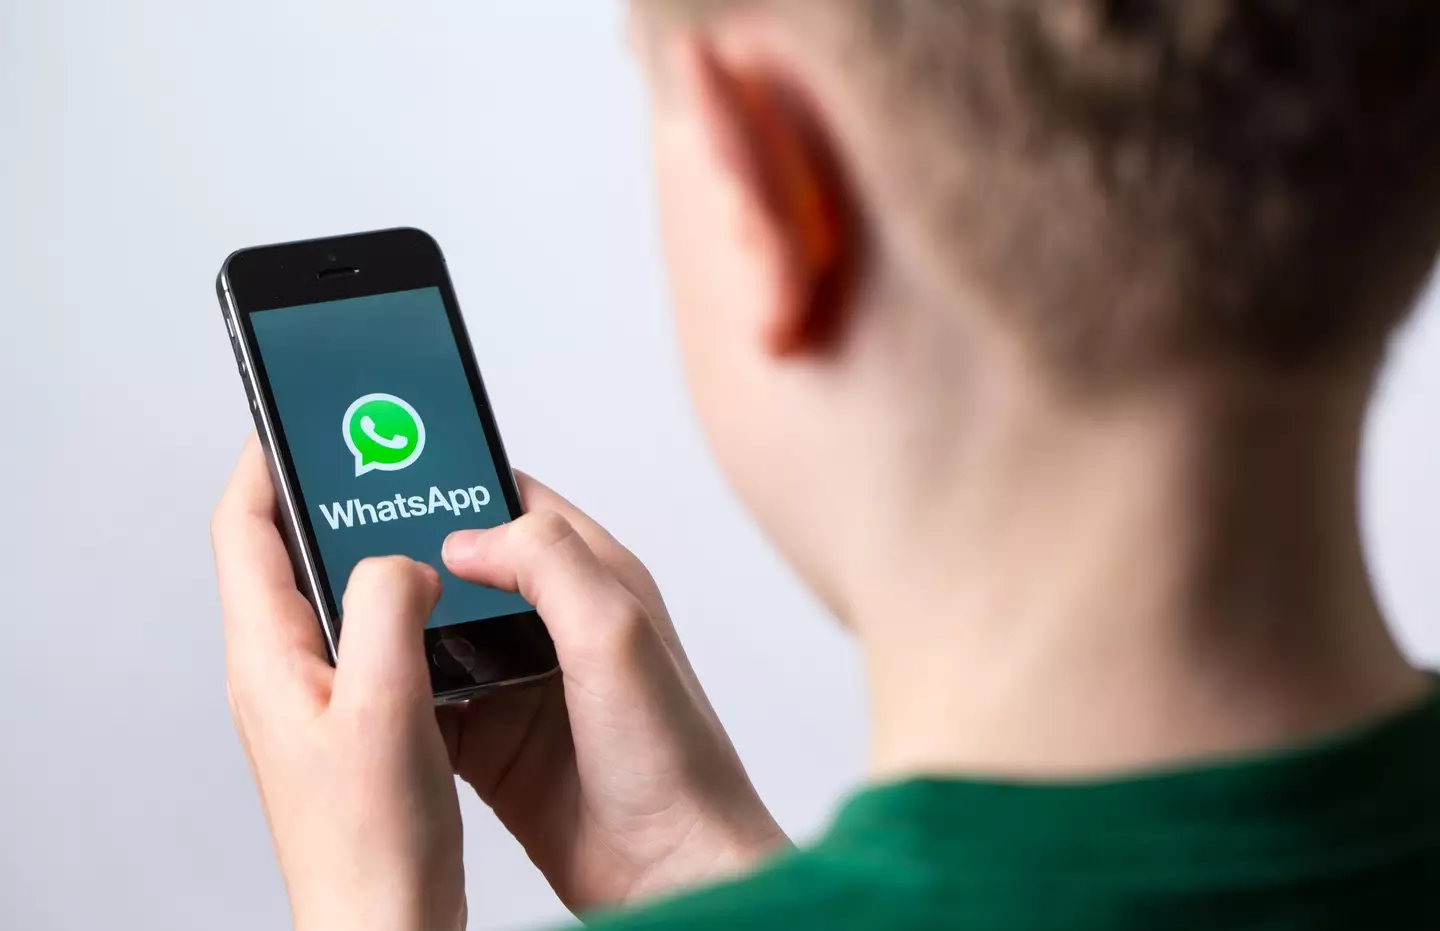 WhatsApp is the world's most popular instant messaging app (